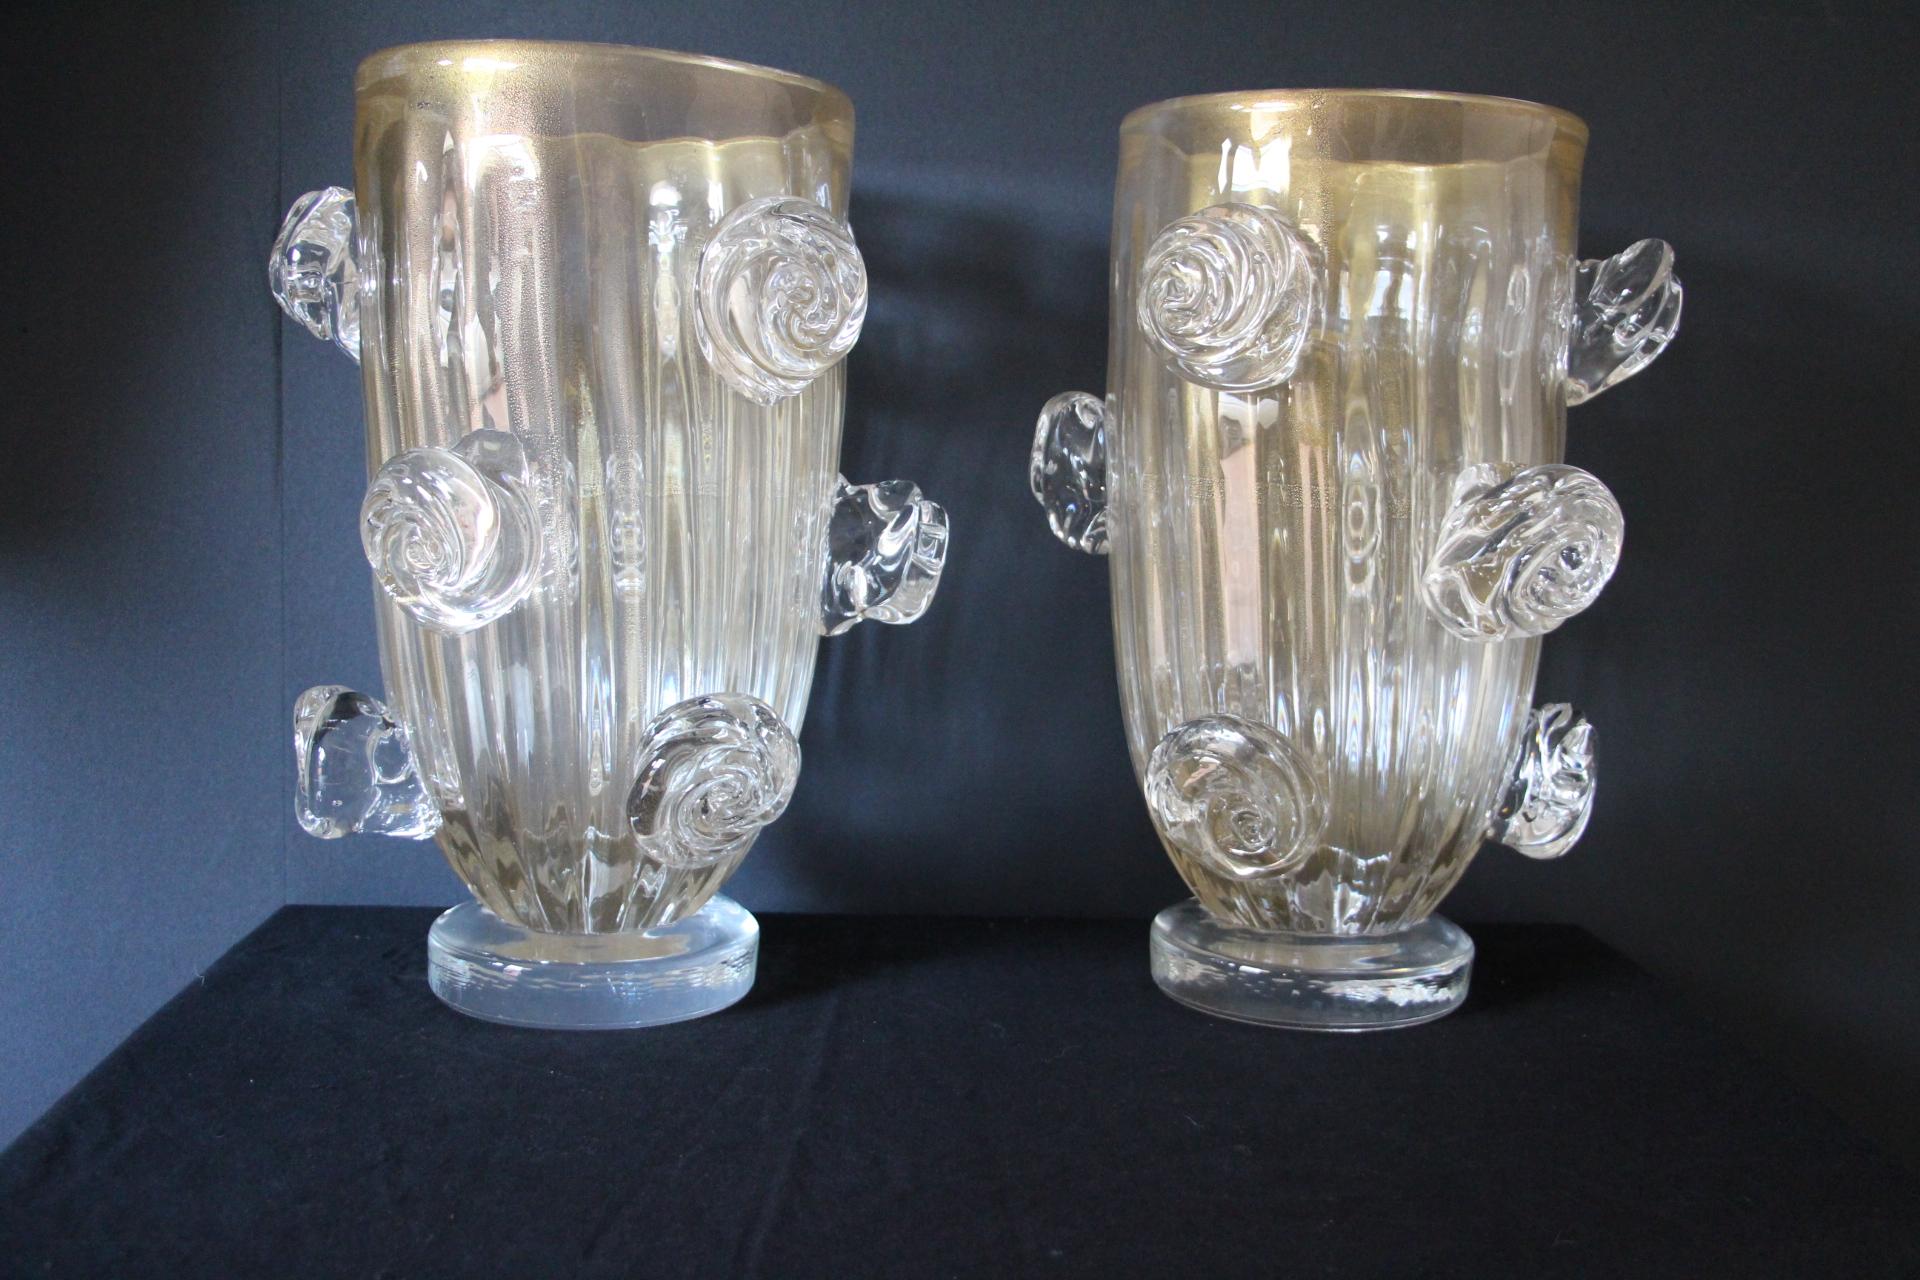 Italian Pair of Large Golden Murano Glass Vases With Roses Decor by Costantini